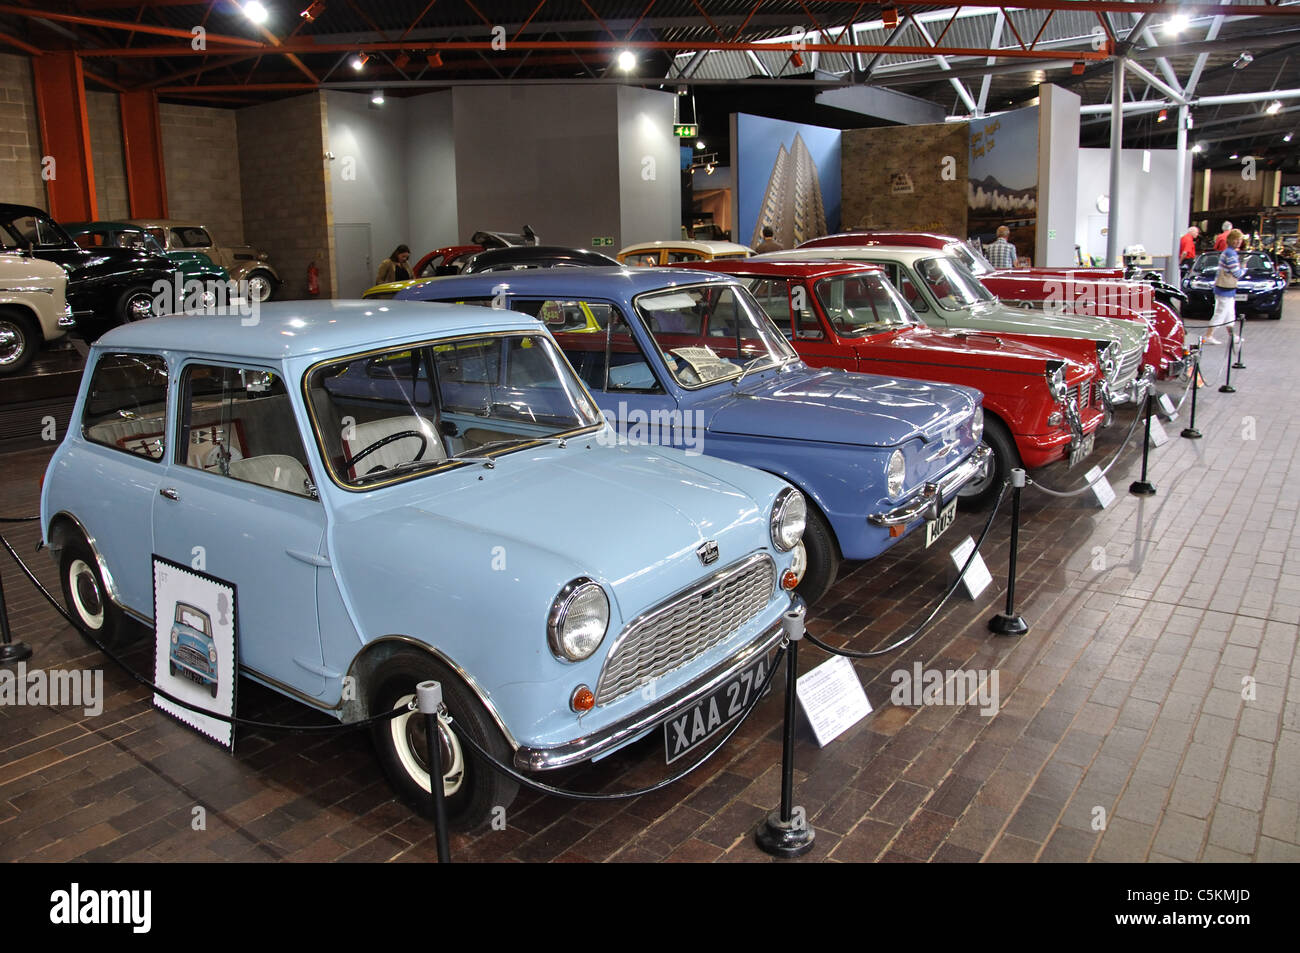 Classic British cars, The National Motor Museum, Beaulieu, New Forest District, Hampshire, England, United Kingdom Stock Photo